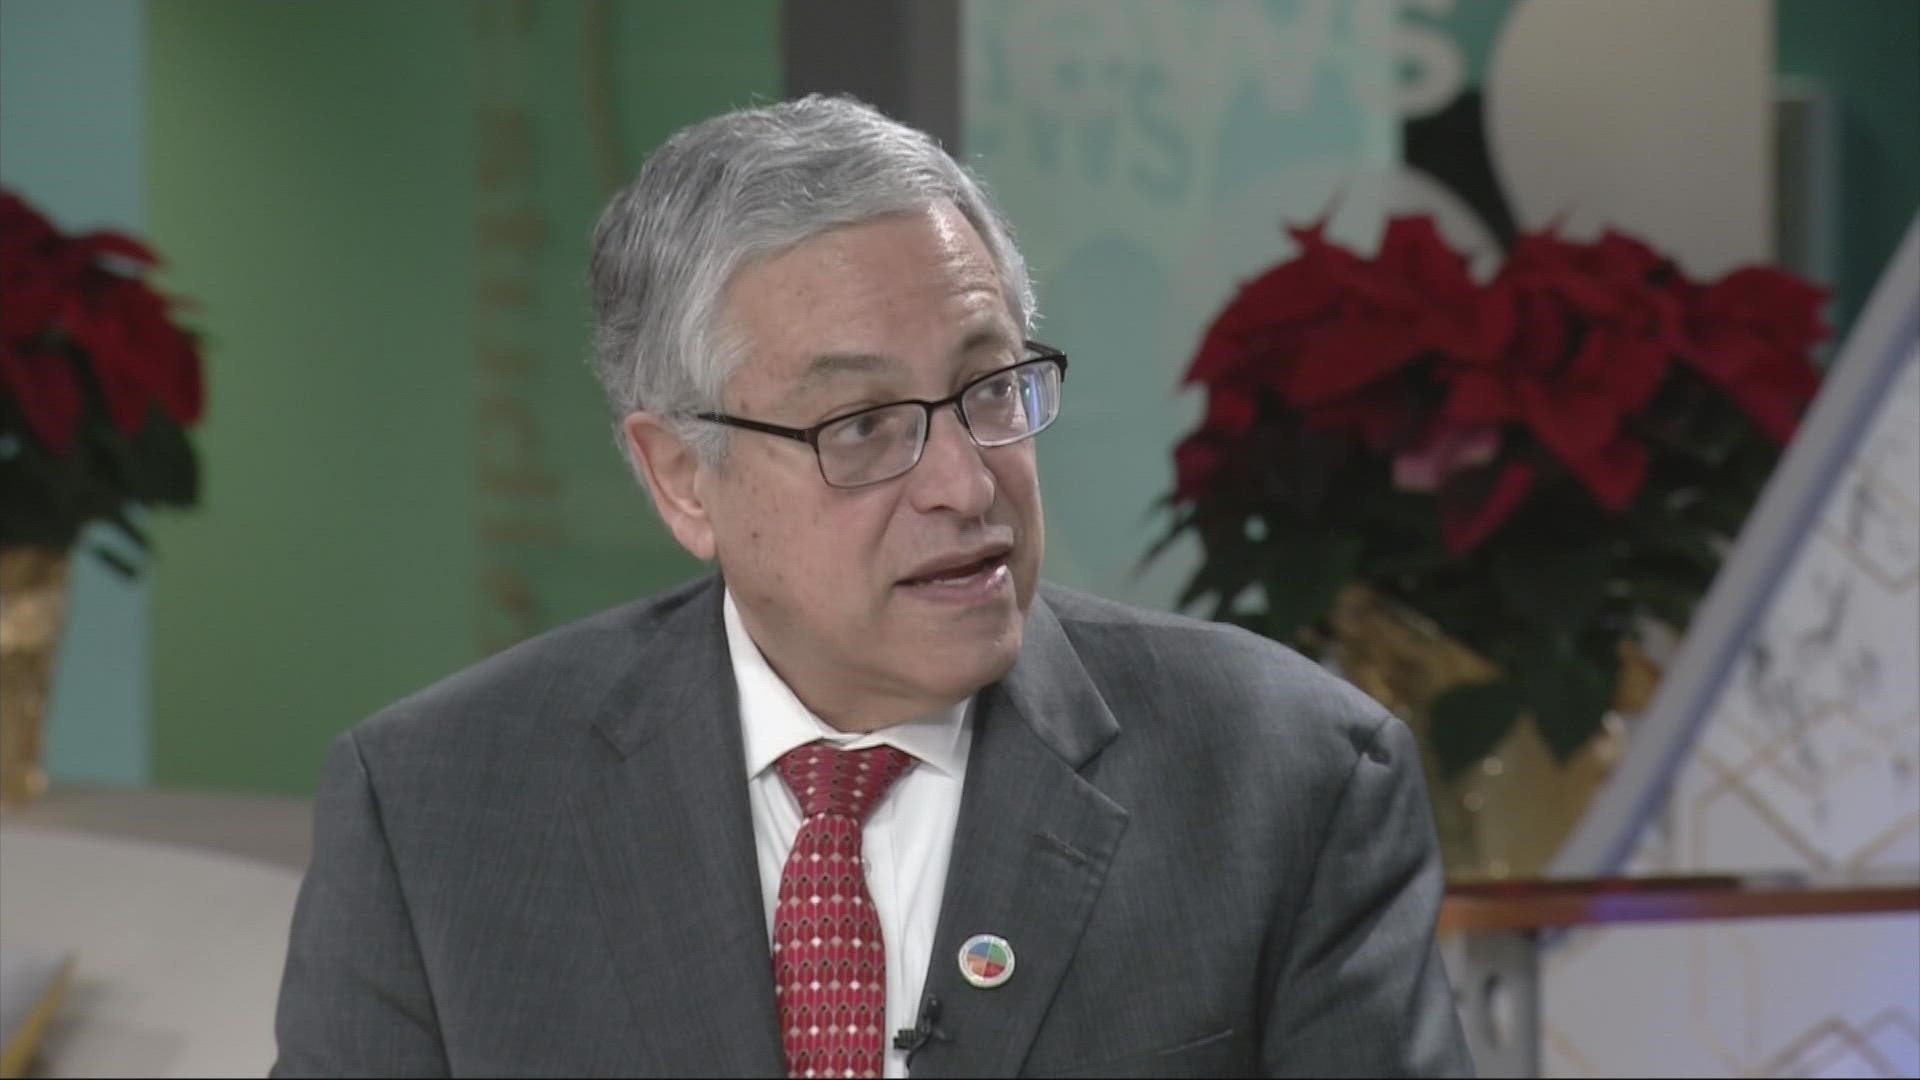 Budish served two terms as Cuyahoga County Executive, opting not to run again this year.